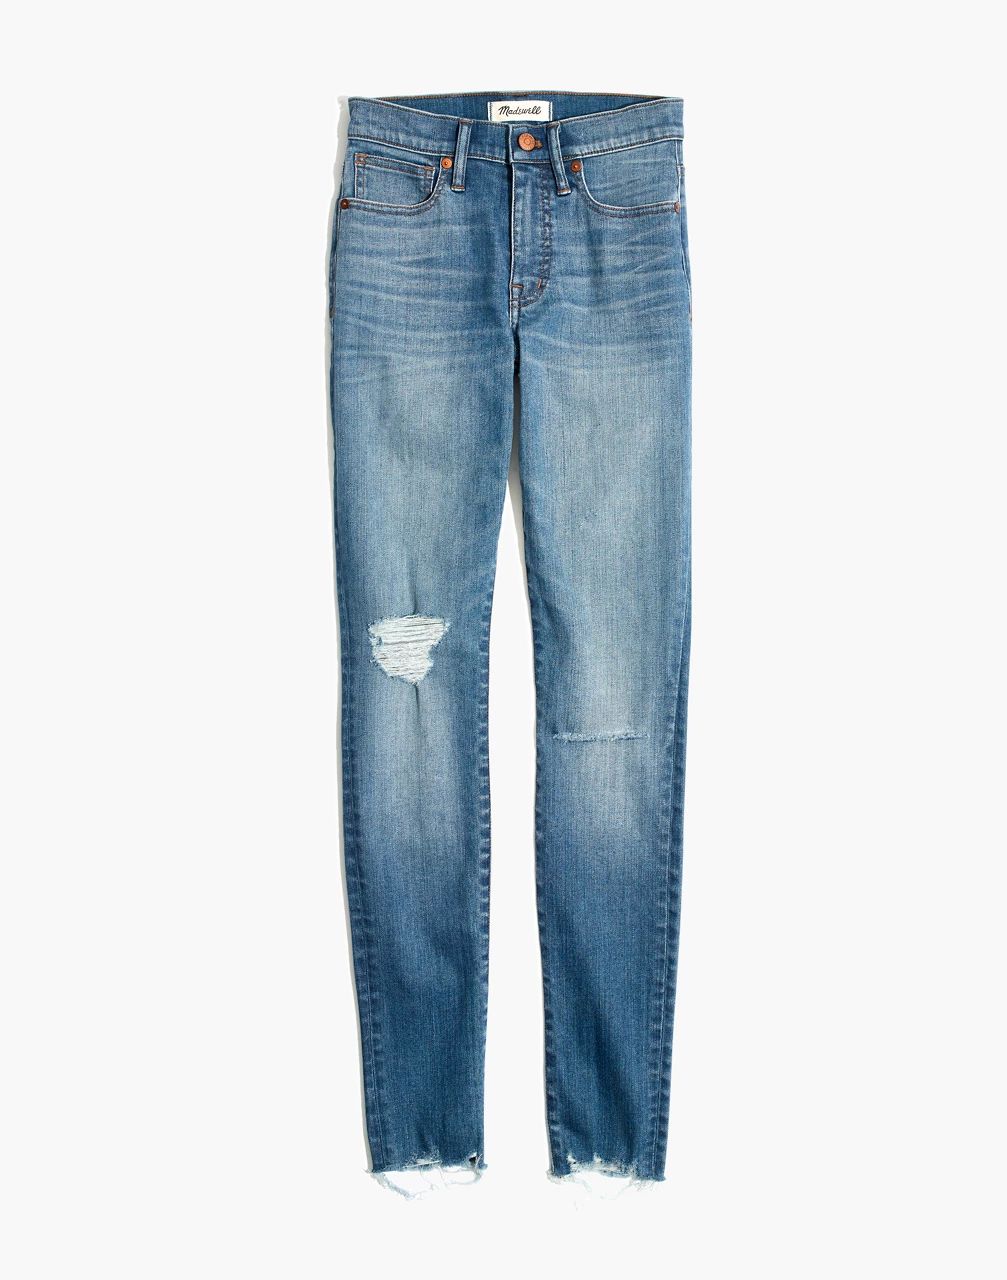 9" High-Rise Skinny Jeans in Frankie Wash: Torn-Knee Edition | Madewell